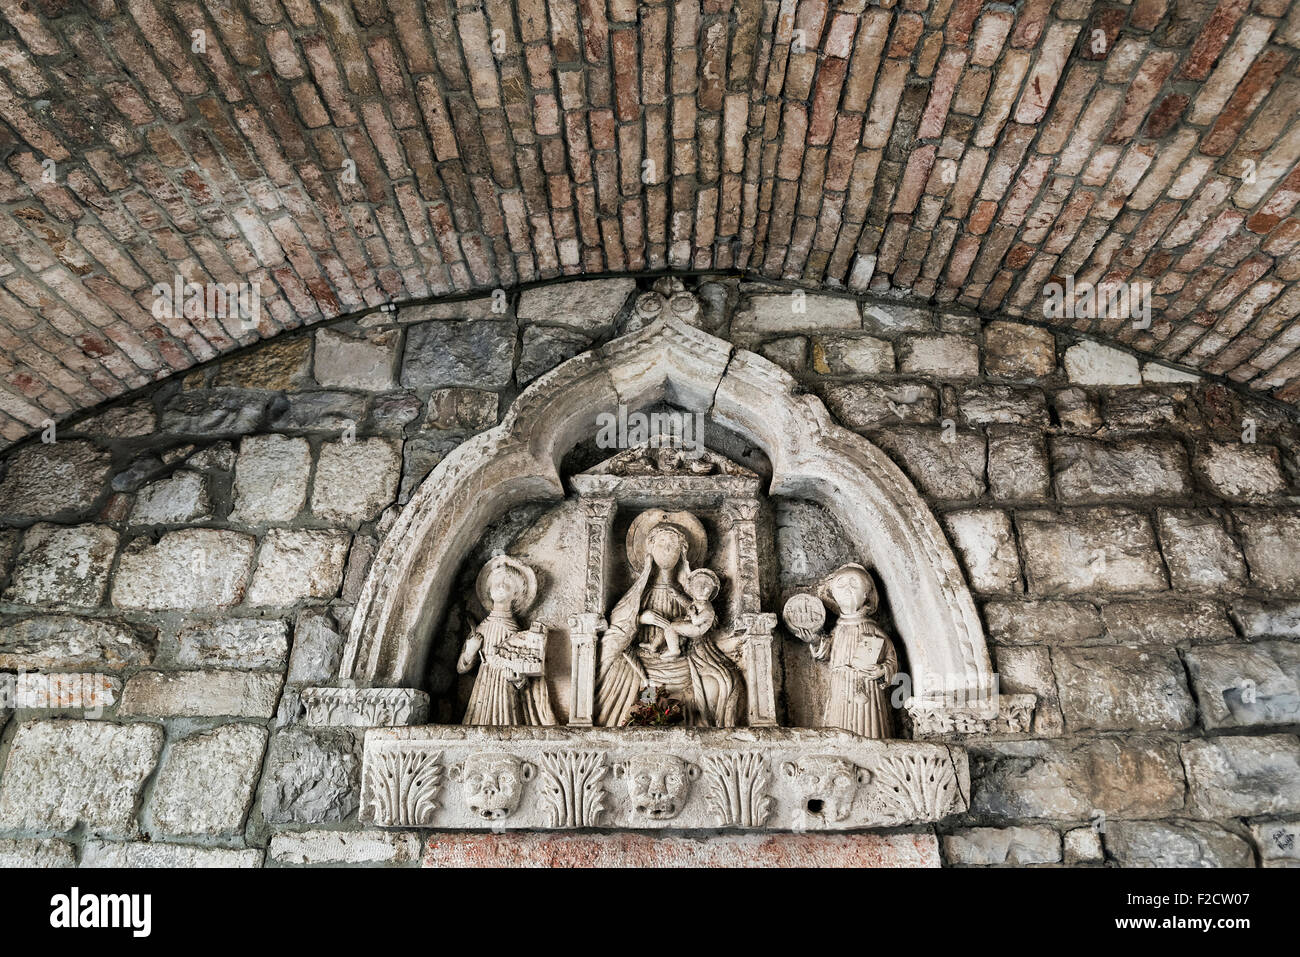 Wall sculpture within the main gate in Kotor old town, Montenegro. Stock Photo